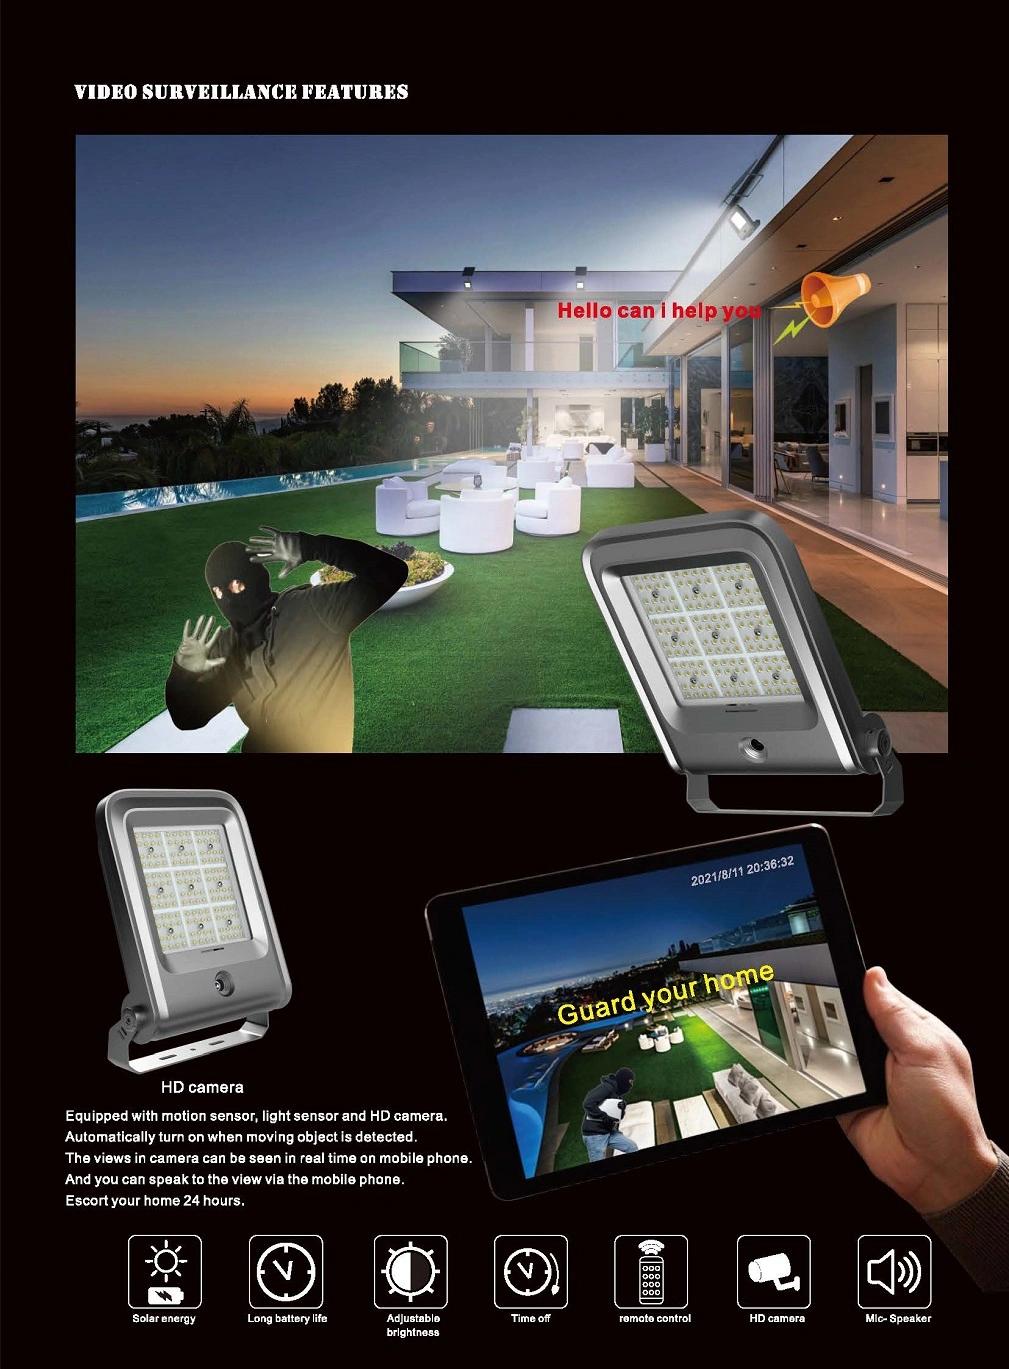 LED Security Light Waterproof Solar Lamps Solar Wall Lamps Courtyard Solar Outdoor Light